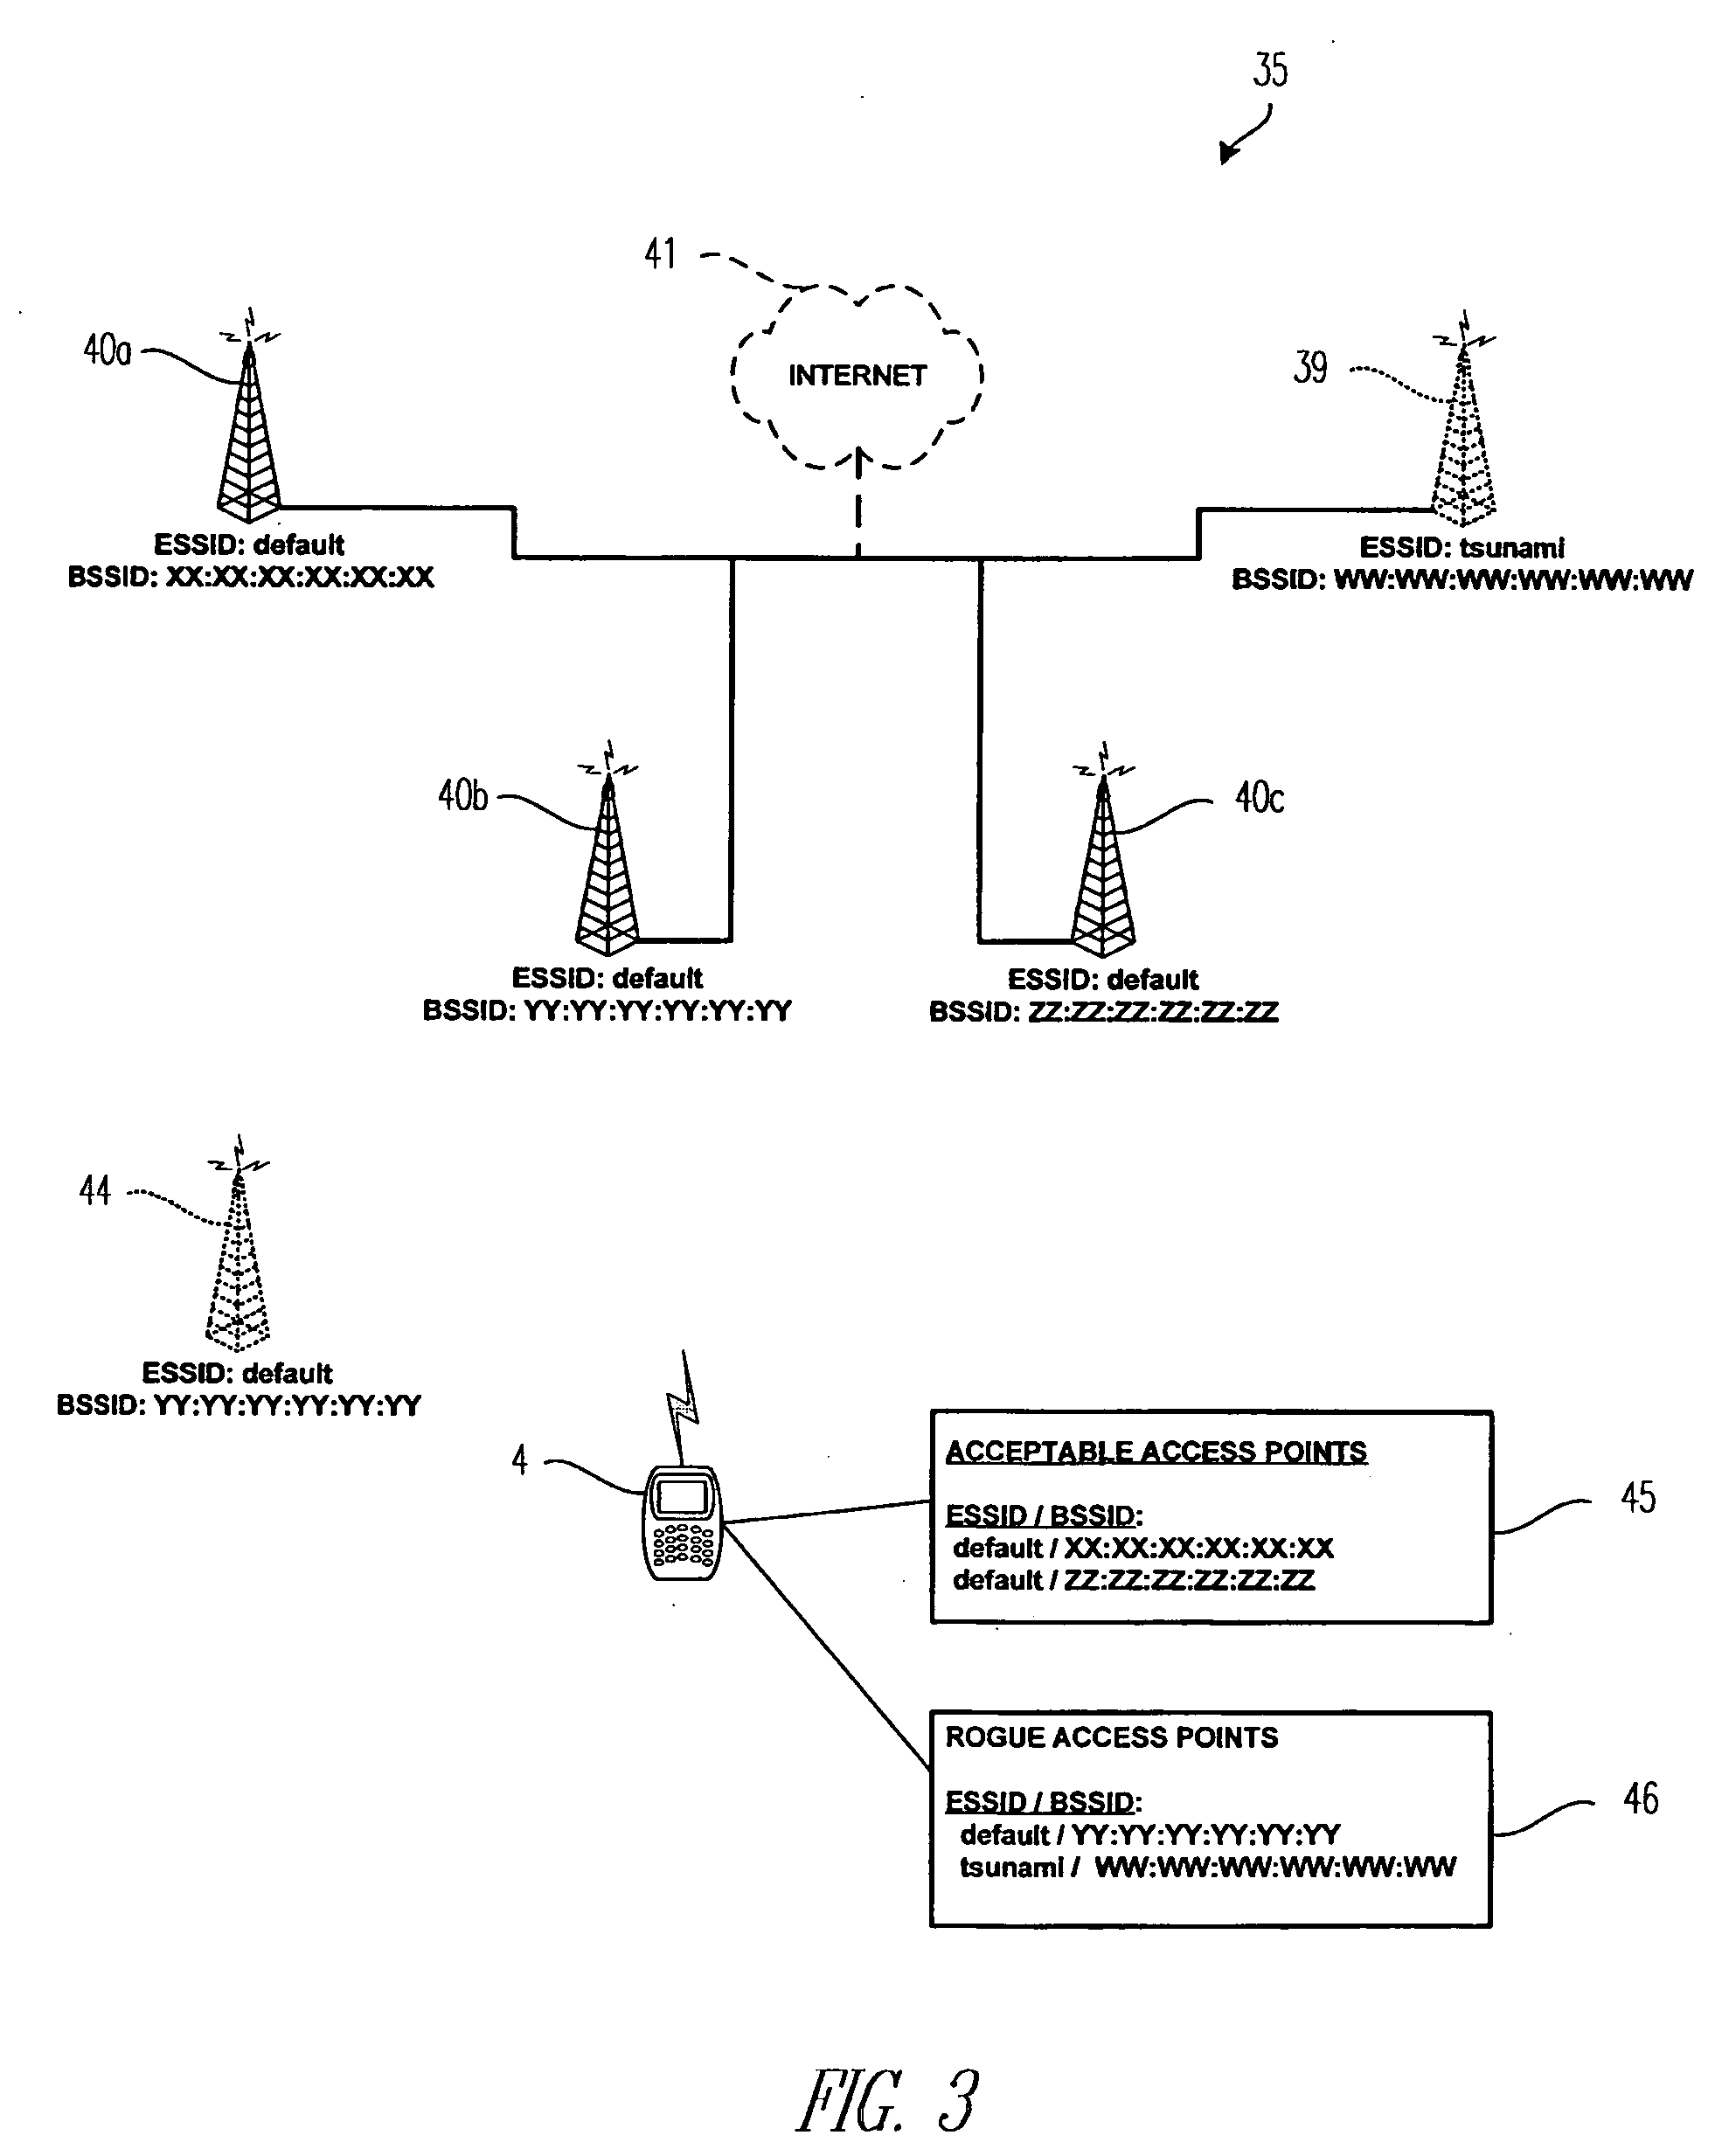 Rogue access point detection and restriction